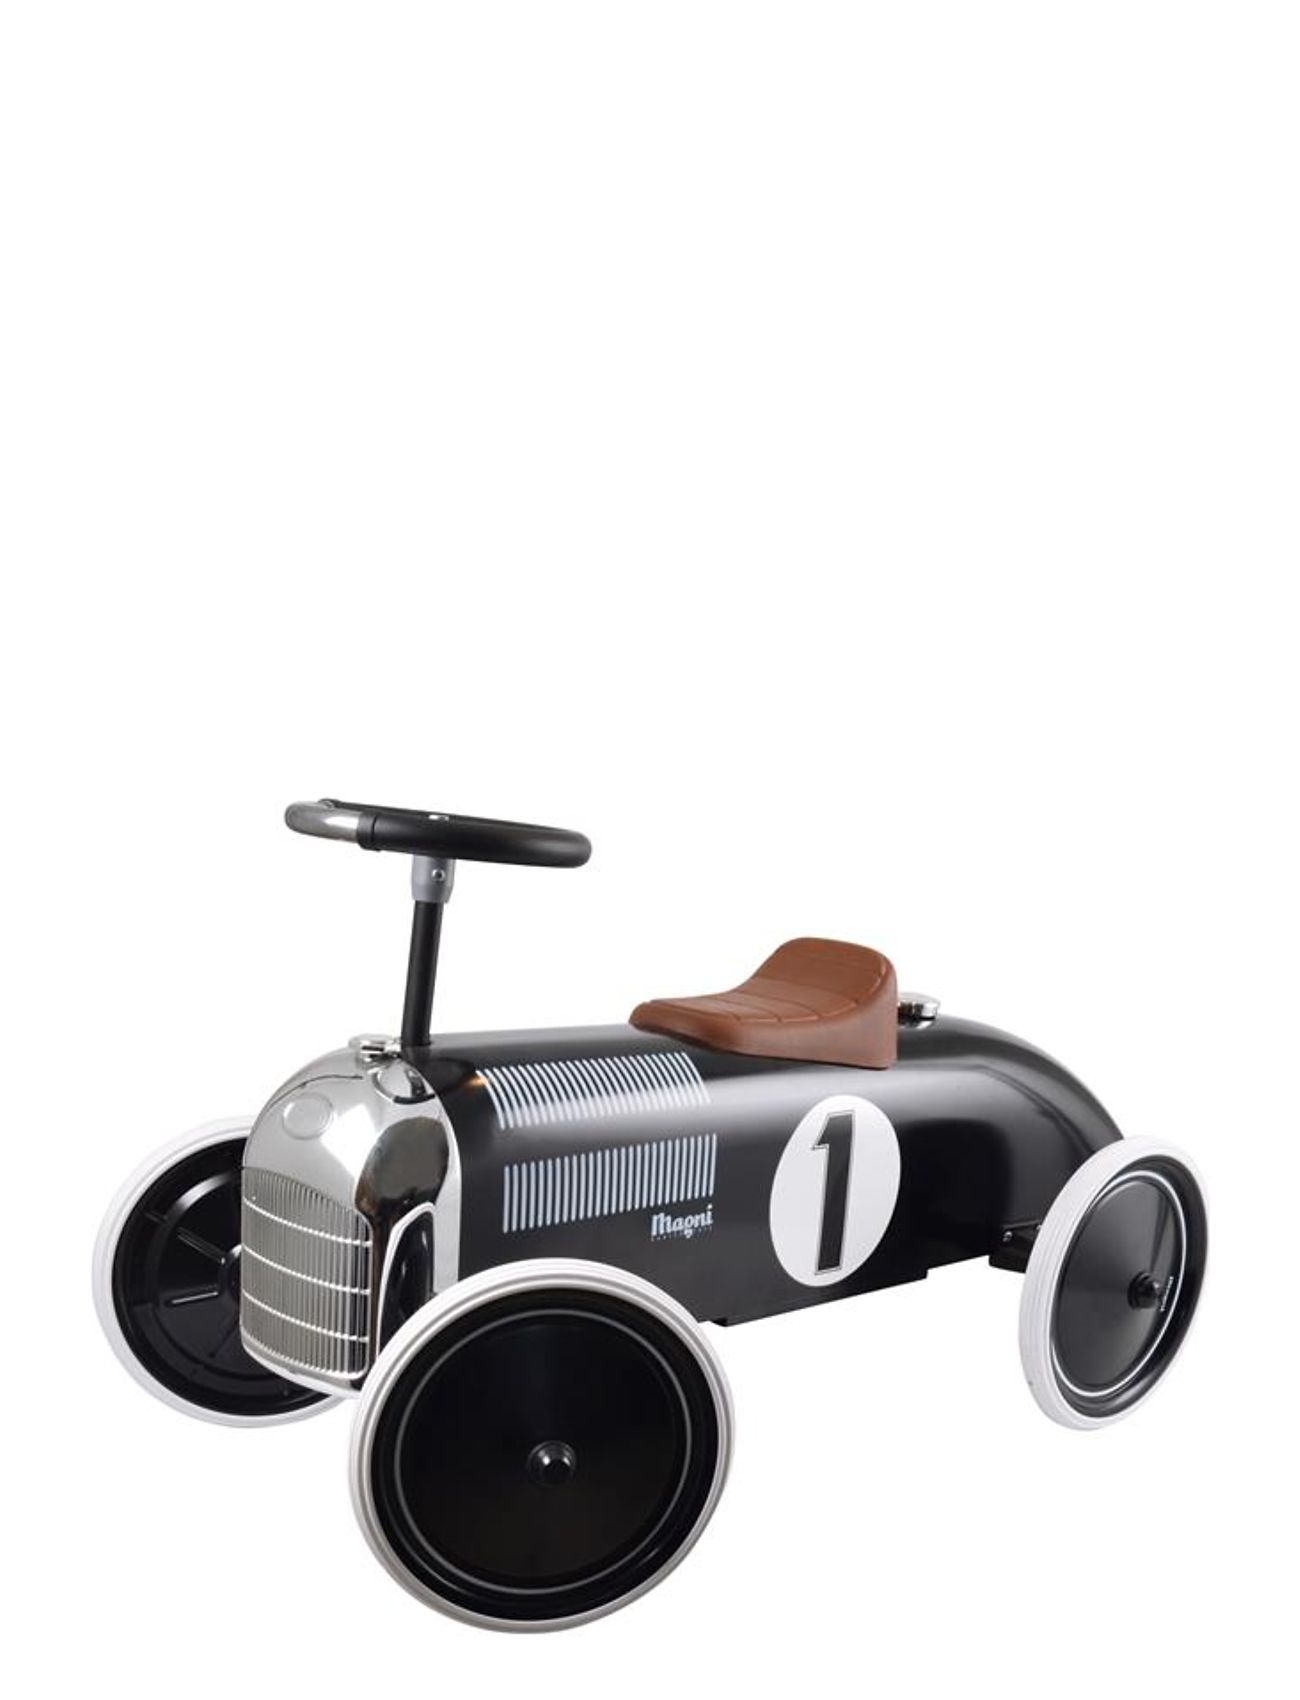 Ride-On-Vehicle, Black Classic Racer W. Big Face Grill Toys Ride On Toys Black Magni Toys